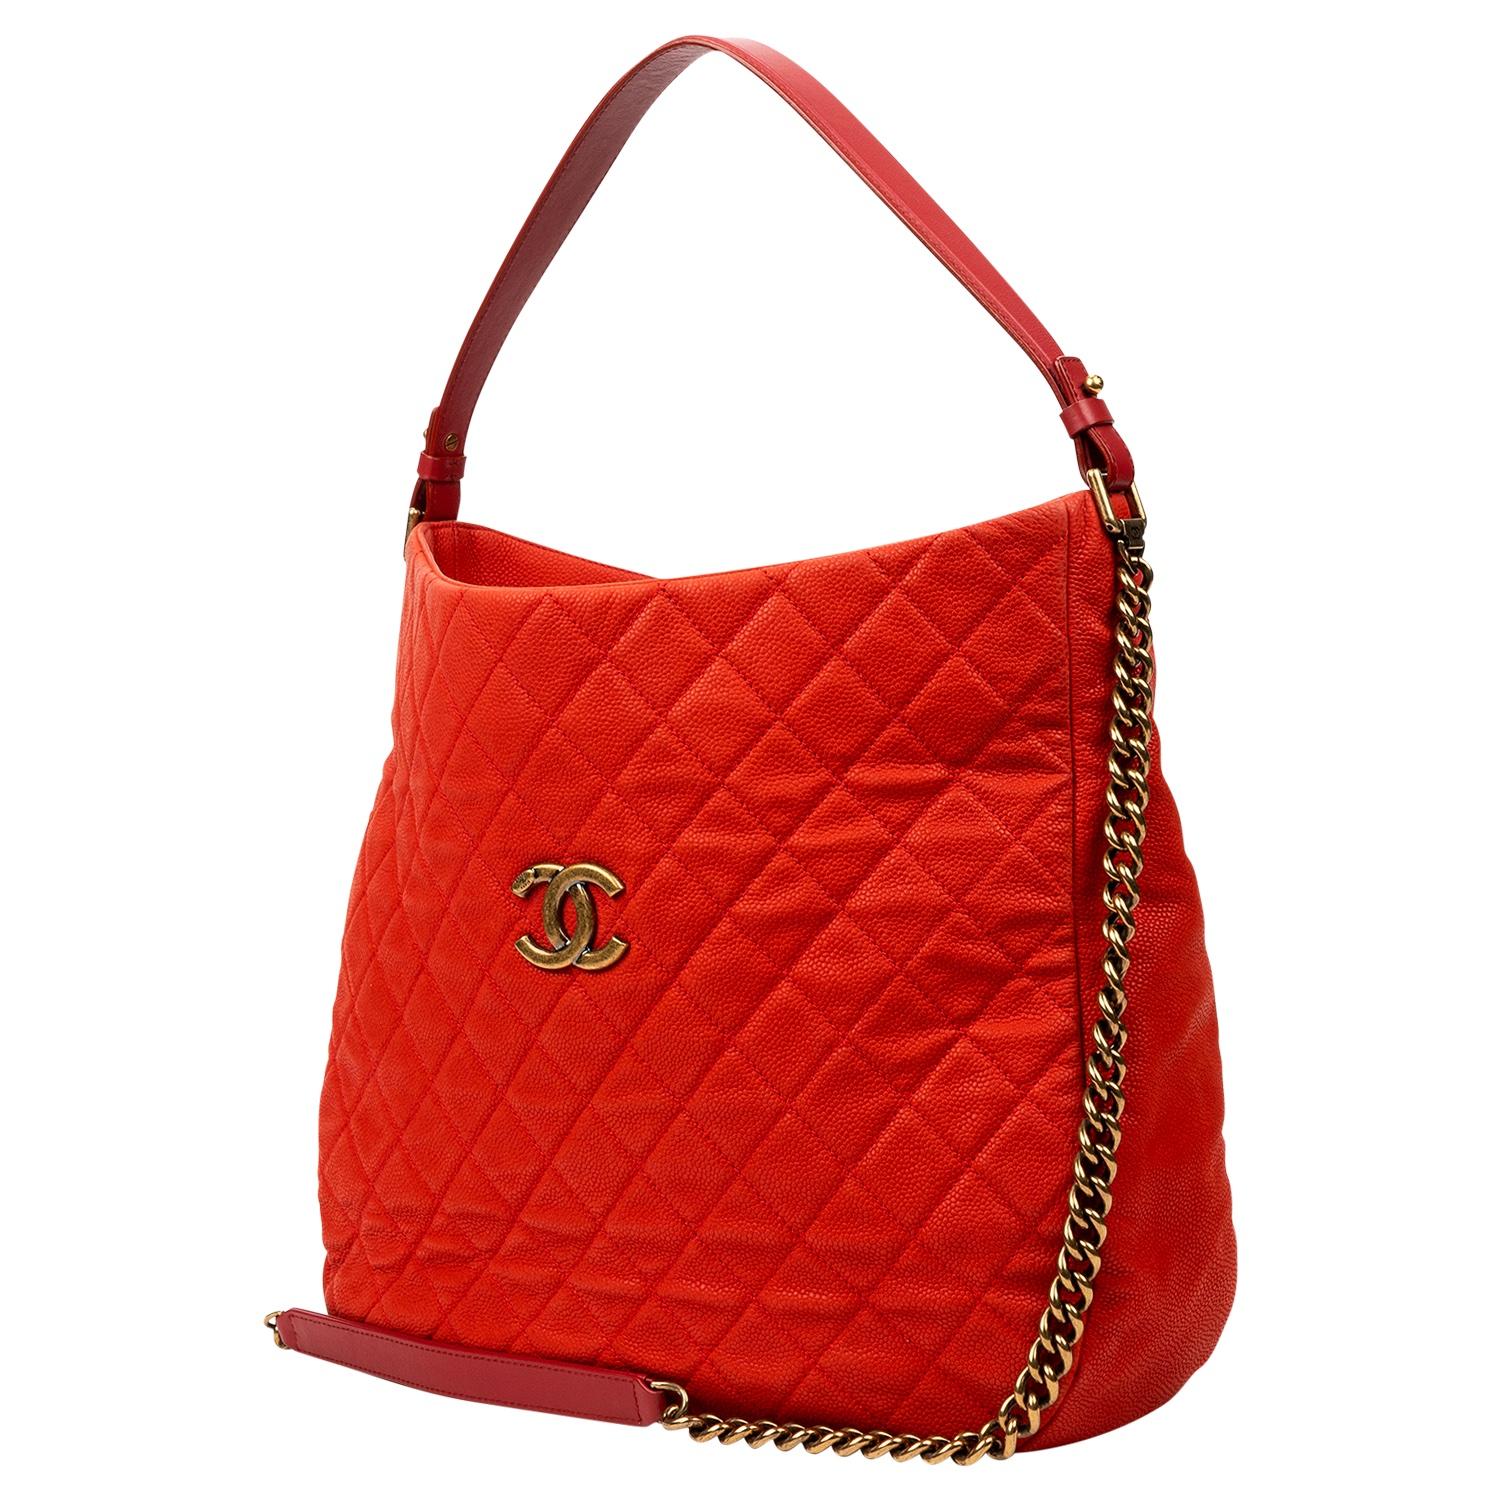 A rare vintage shopper from the Cruise 2013 Collection by the beloved Karl Lagerfeld. This practical and chic piece is crafted of vibrant yet elegant red caviar leather, gold-tone brass hardware, and a chain-link handle and single shoulder strap. We